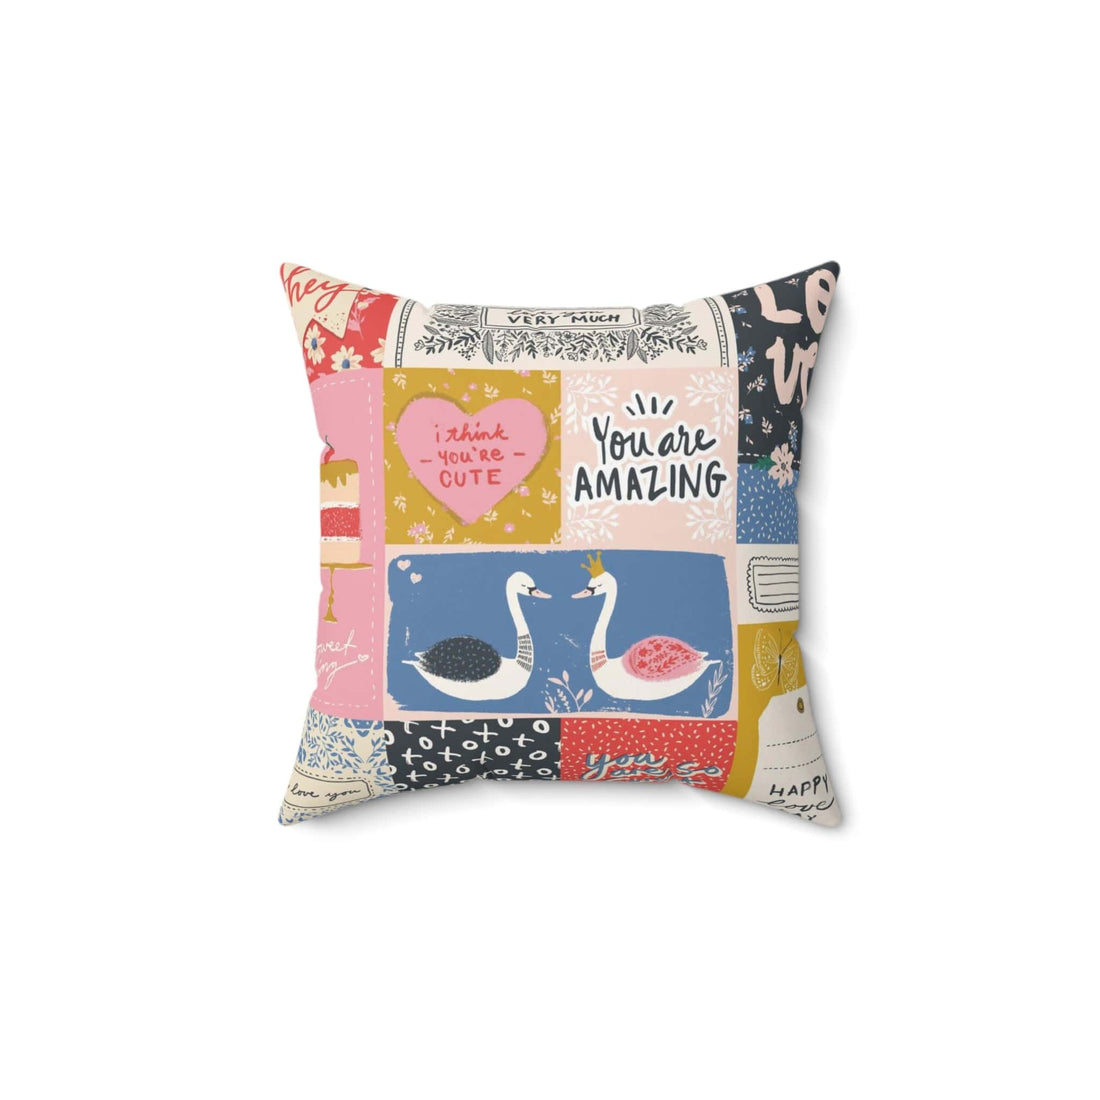 Kate McEnroe New York Whimsical Love Patchwork Throw Pillow, Cozy Affirmation CushionThrow Pillows19502347075830268211